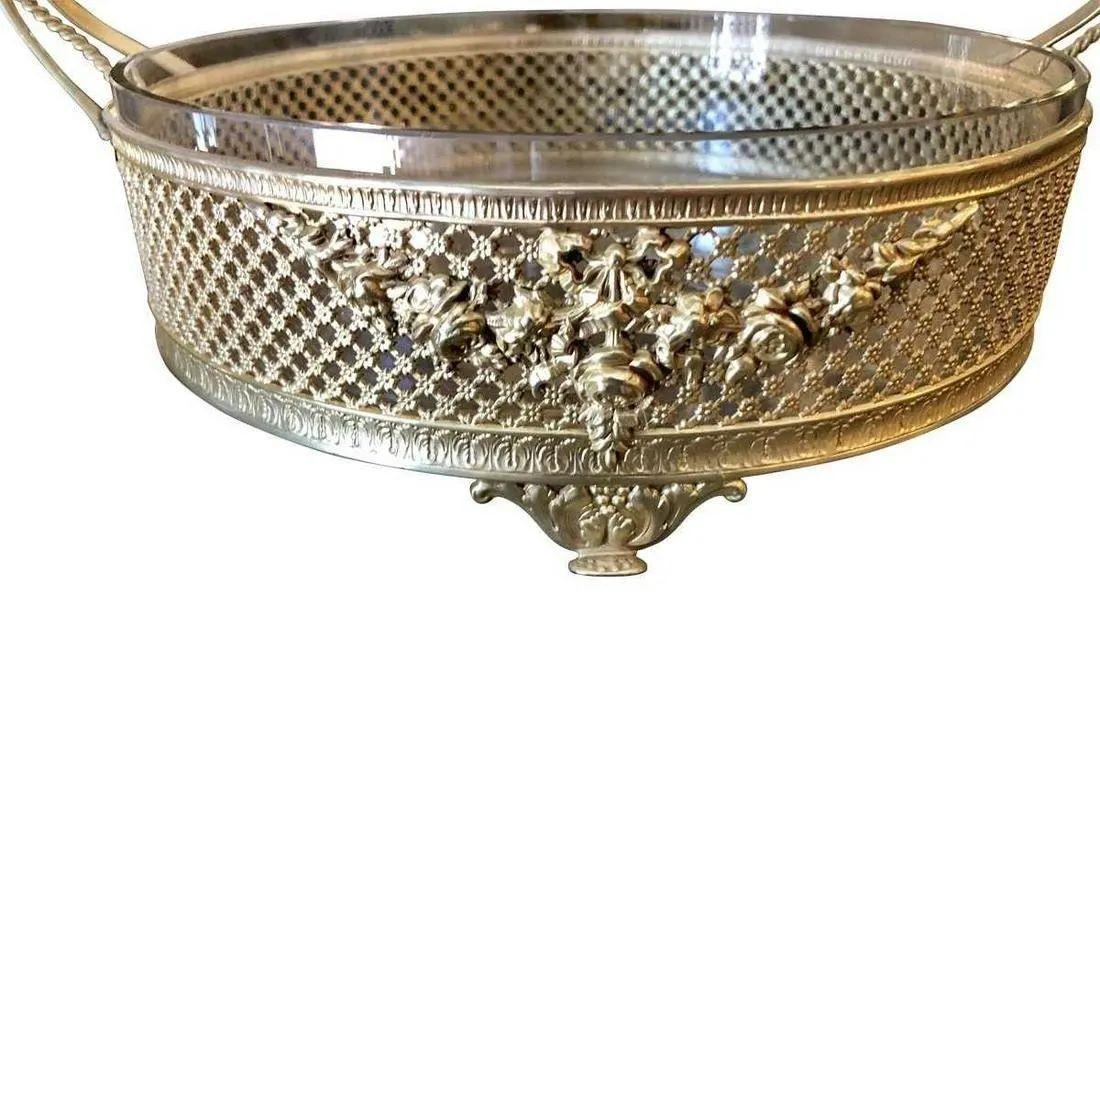 Polished brass handled basket with ivy leaf and ribbon design.
Cut-glass insert. that is removable for cleaning.
Dimensions are approximate - Width 11 Depth 8.75 Height 10.